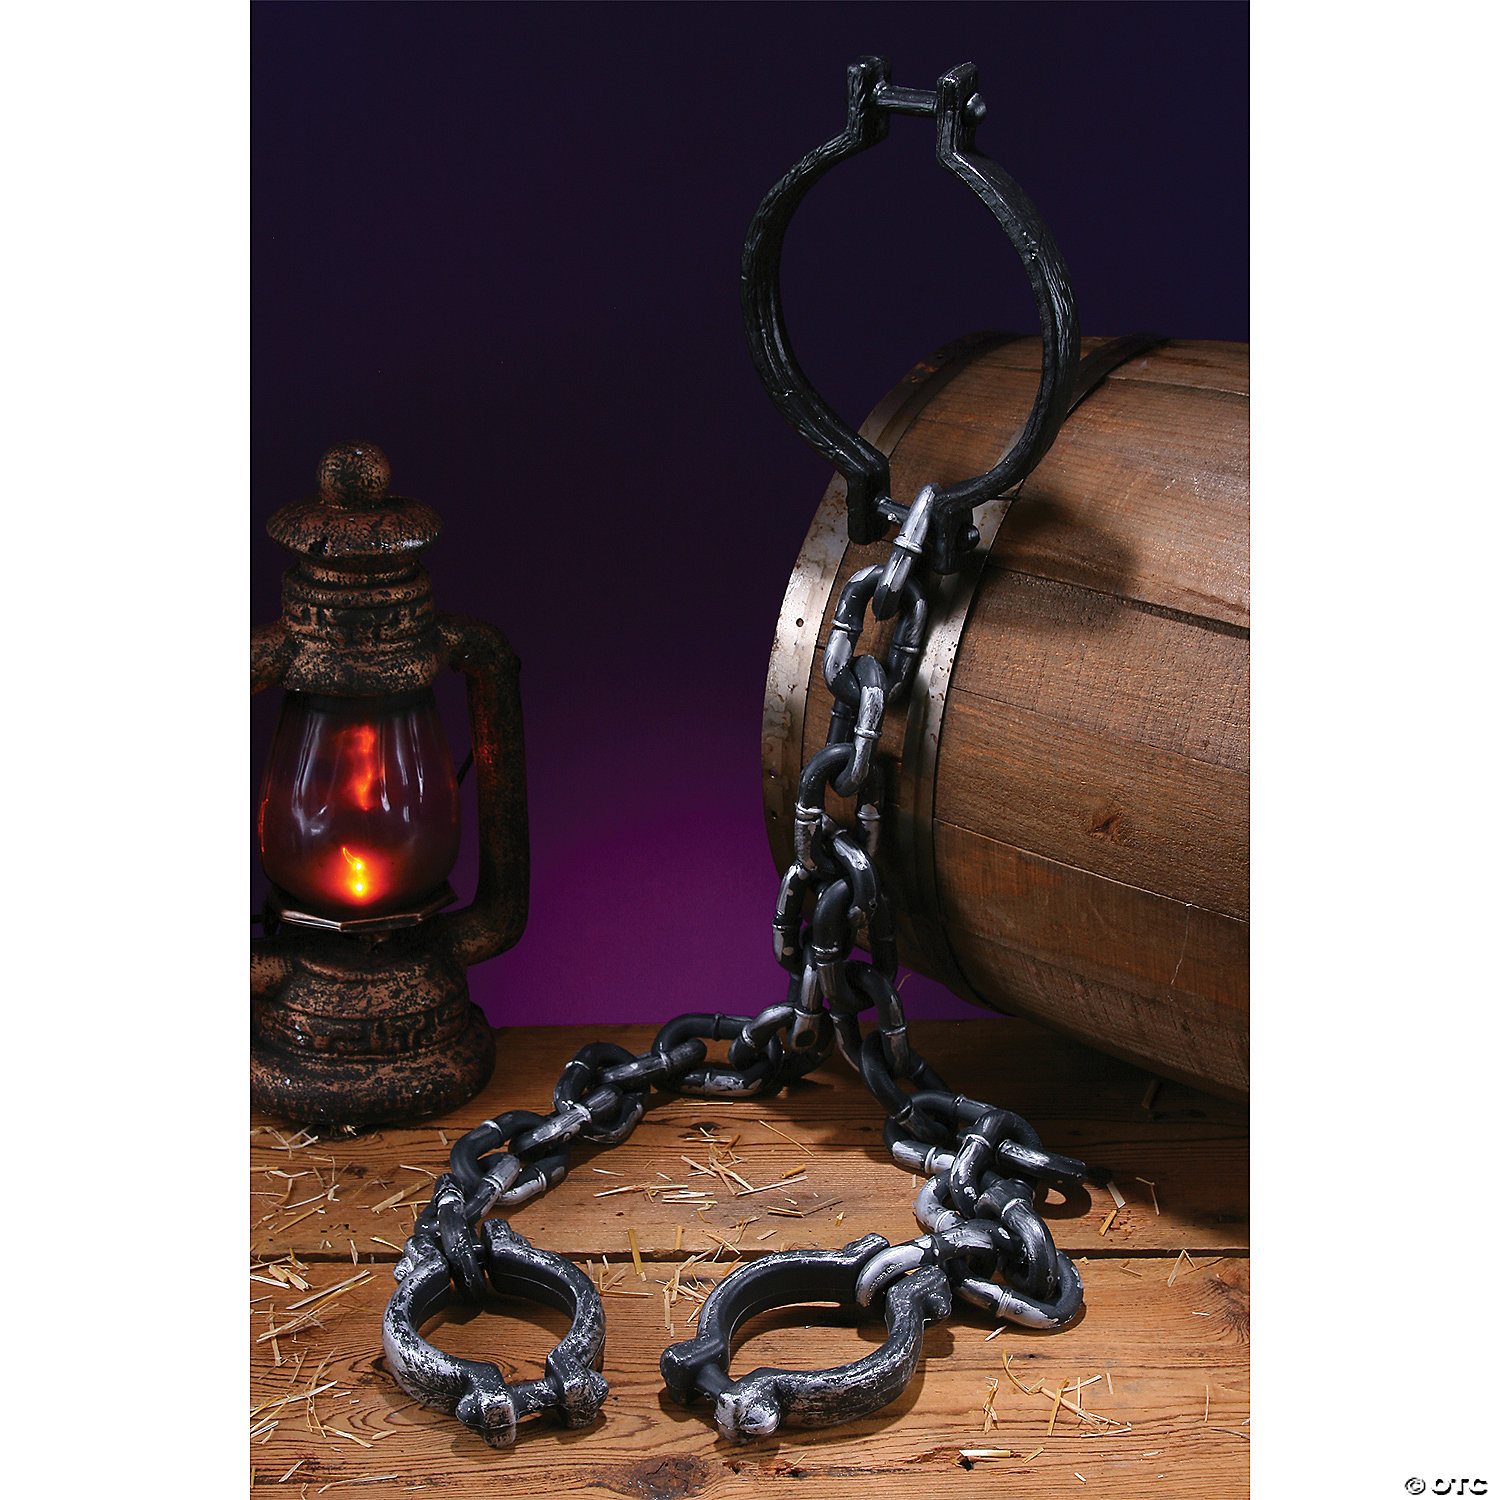 SHACKLES AND CHAINS - HALLOWEEN